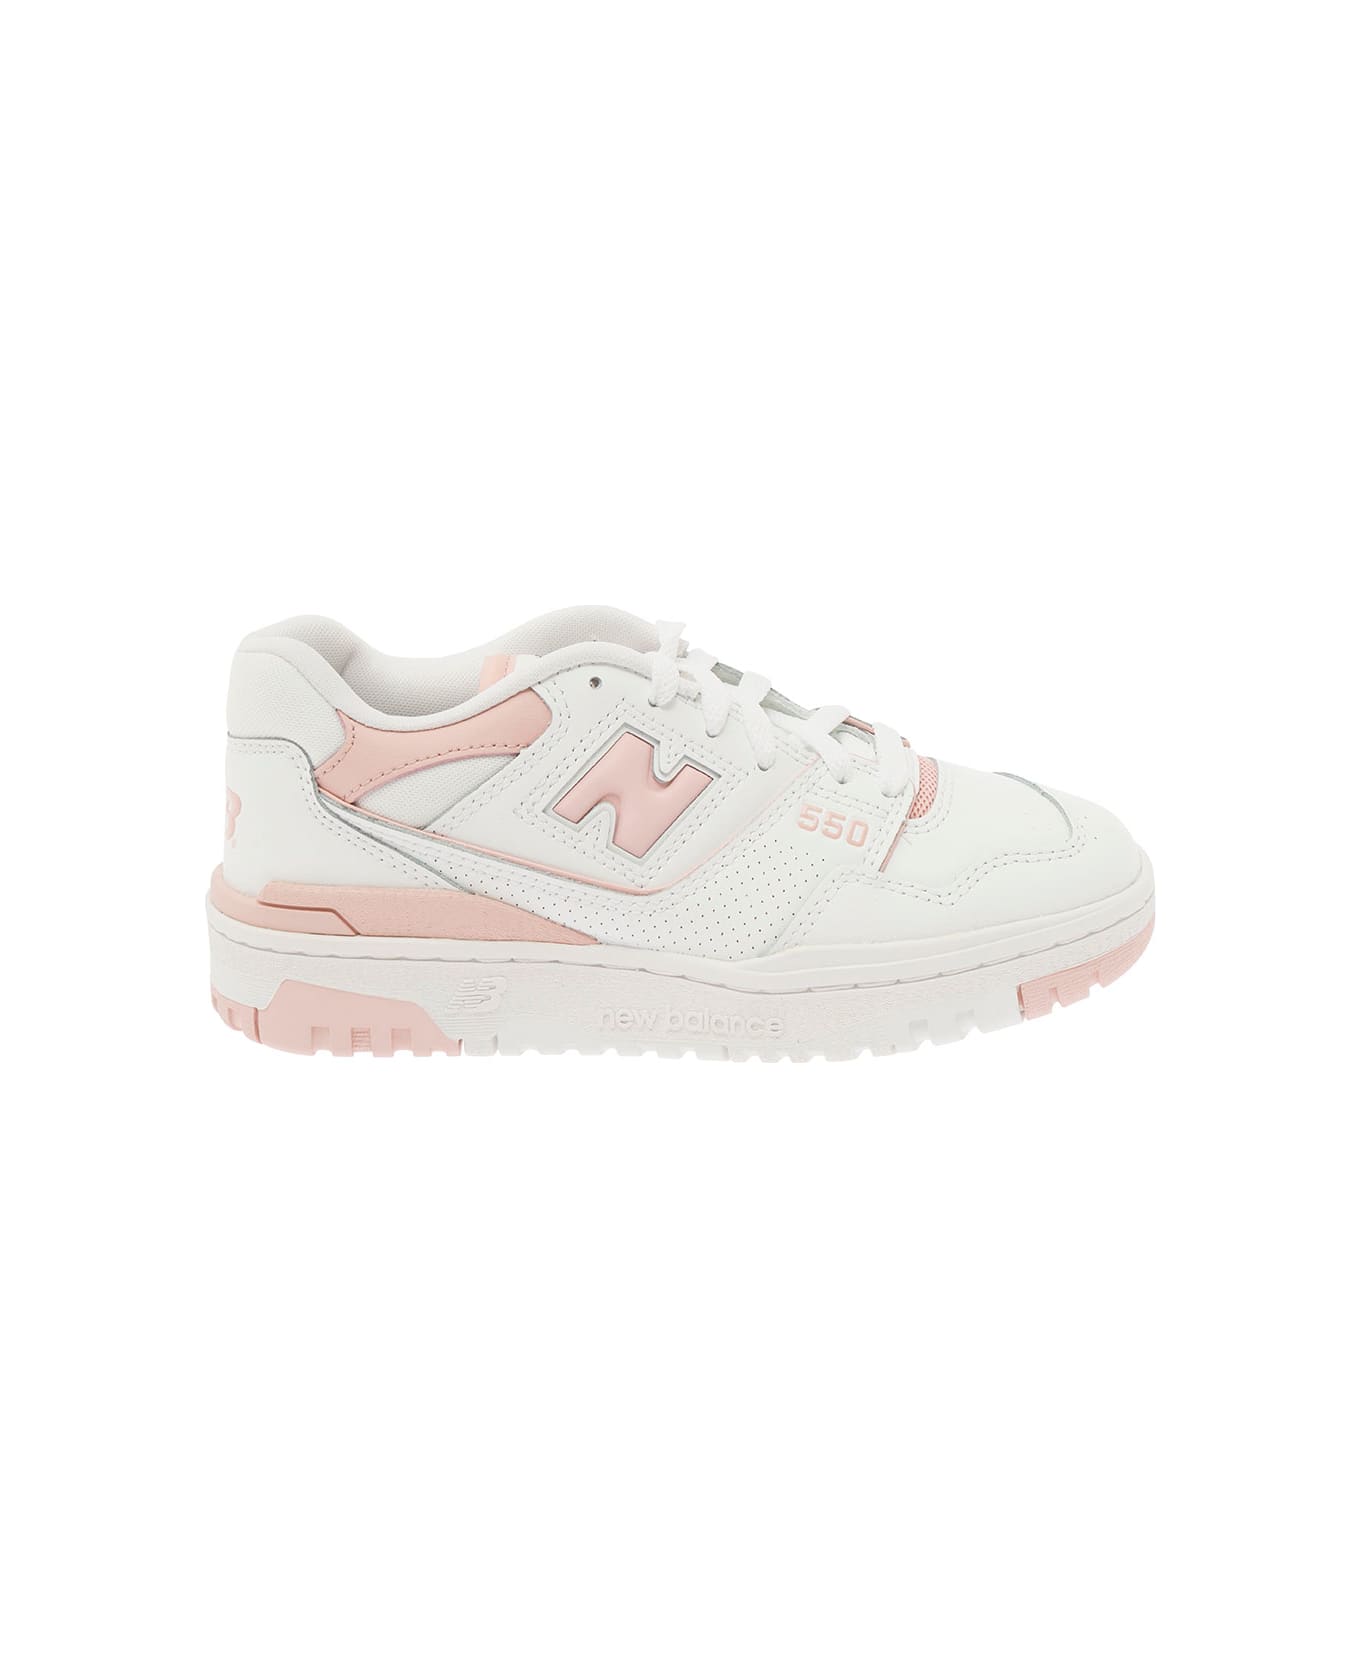 New Balance '550' White And Light Pink Low Top Sneakers With Logo In Leather Woman - Pink スニーカー